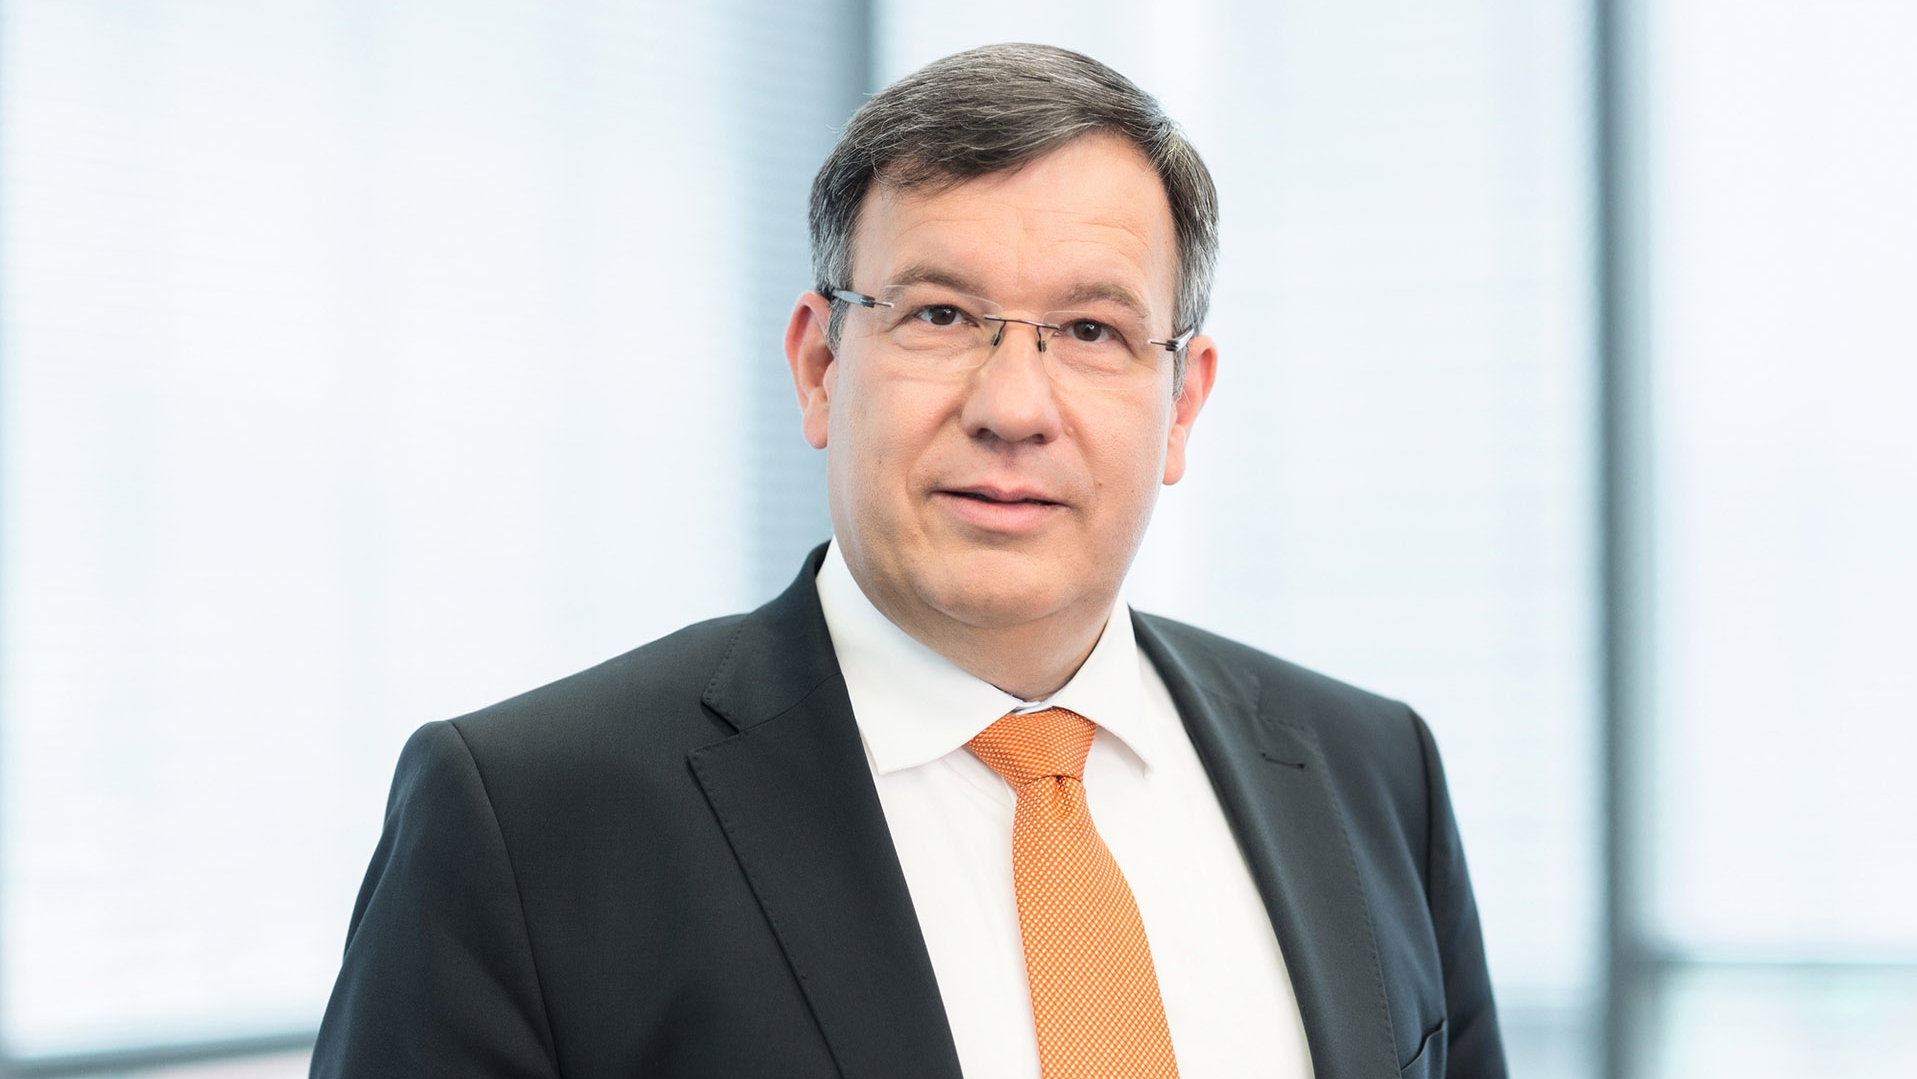 Thomas Spitzenpfeil, Member of the Executive Board of the ZEISS Group (CFO and CIO)